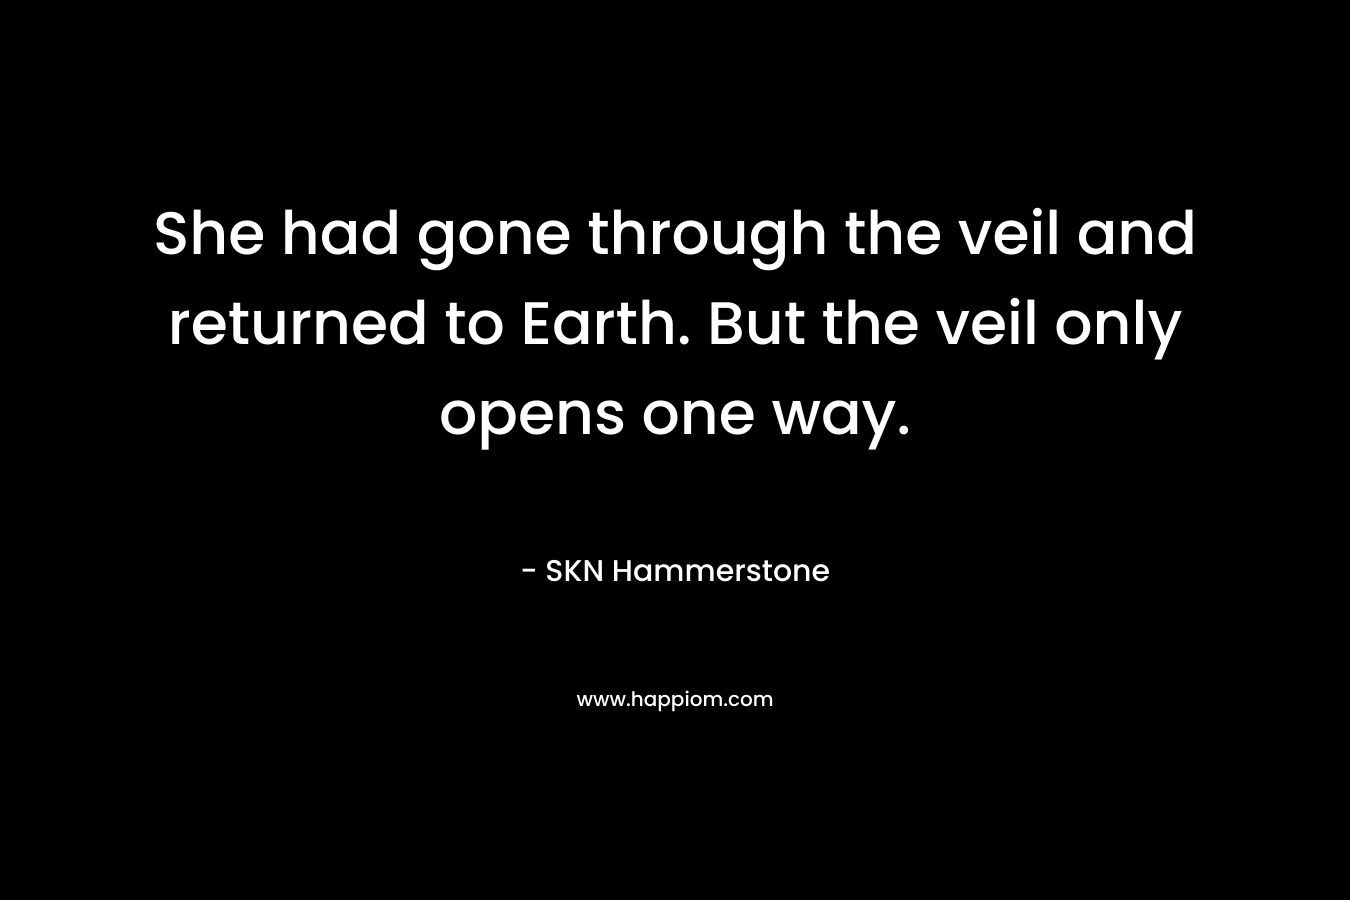 She had gone through the veil and returned to Earth. But the veil only opens one way. – SKN Hammerstone